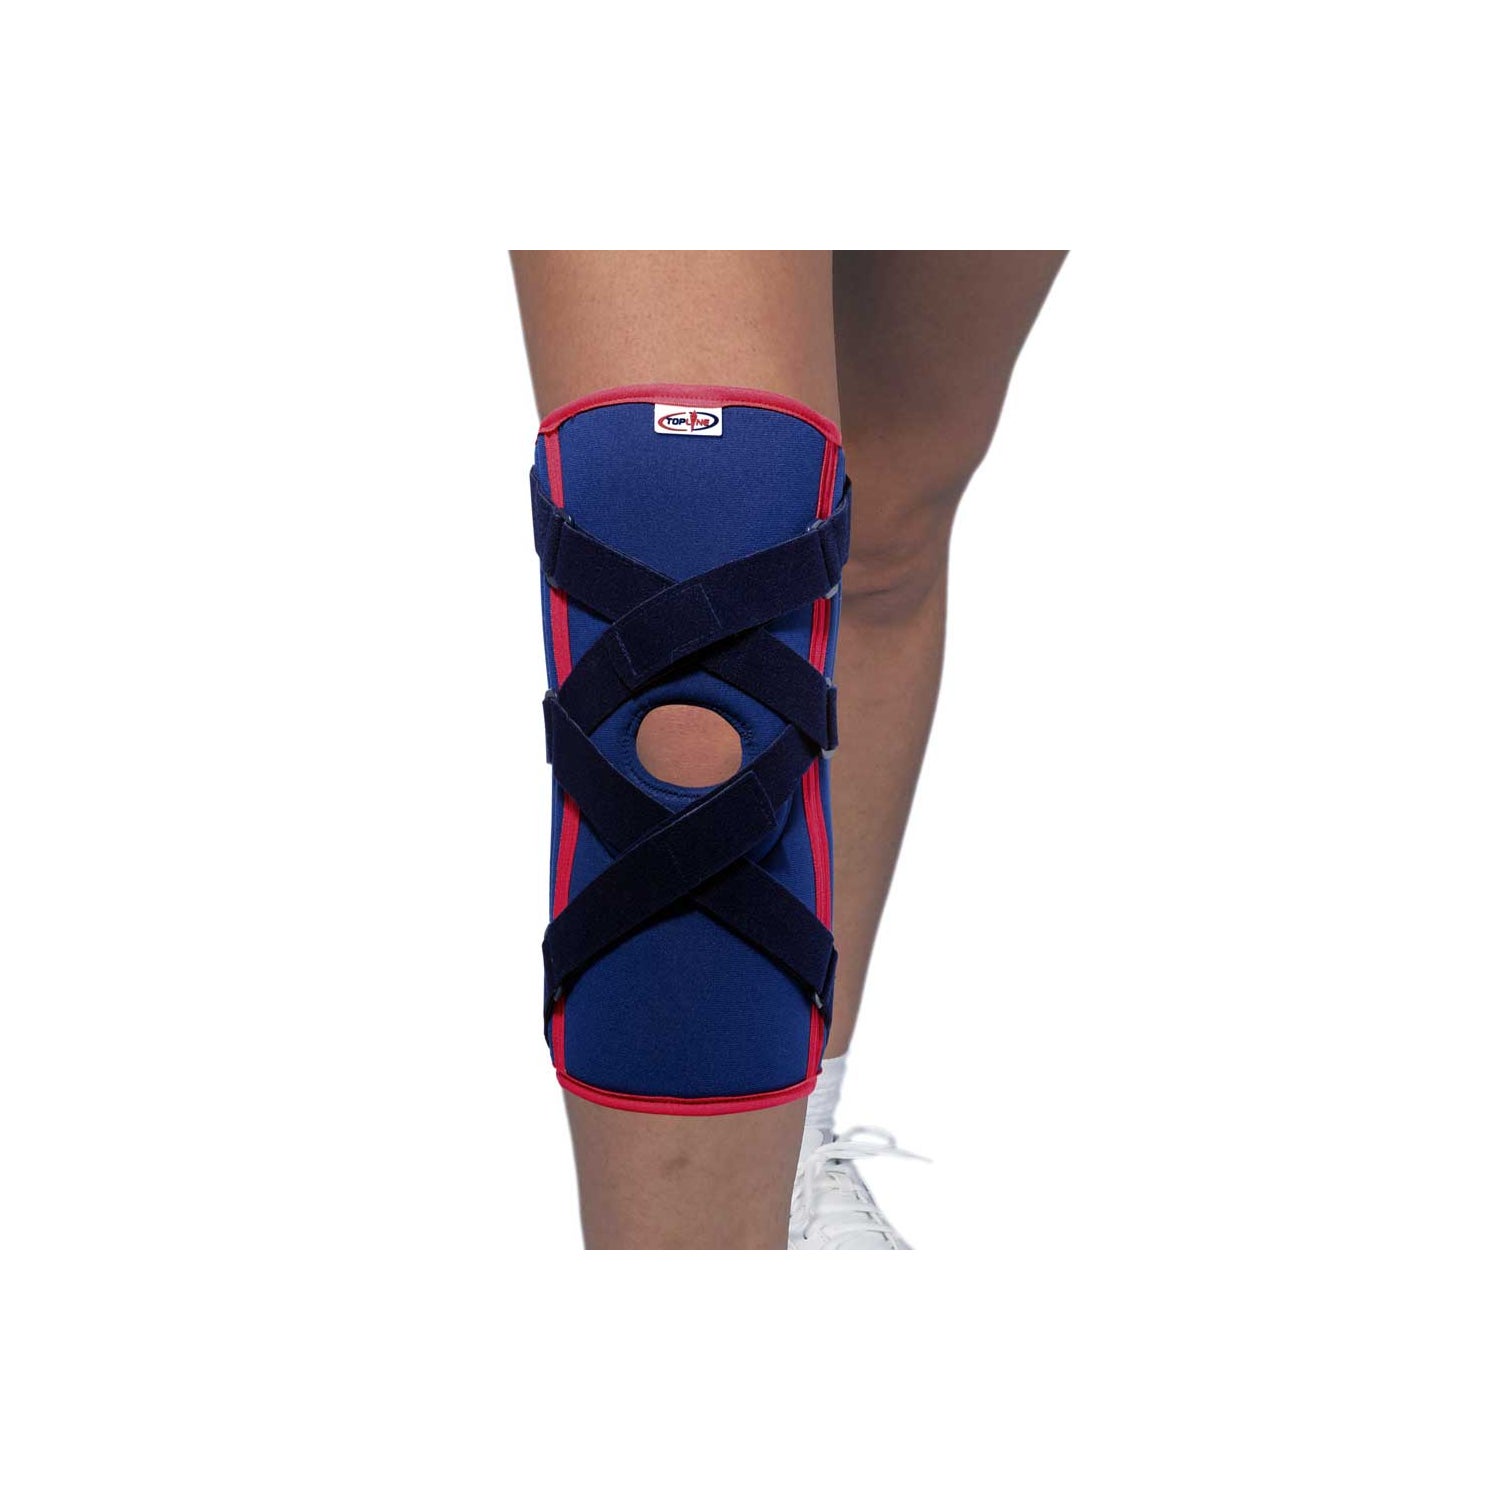 Epitact Genouillère pour Ligaments Taille 03 1ut